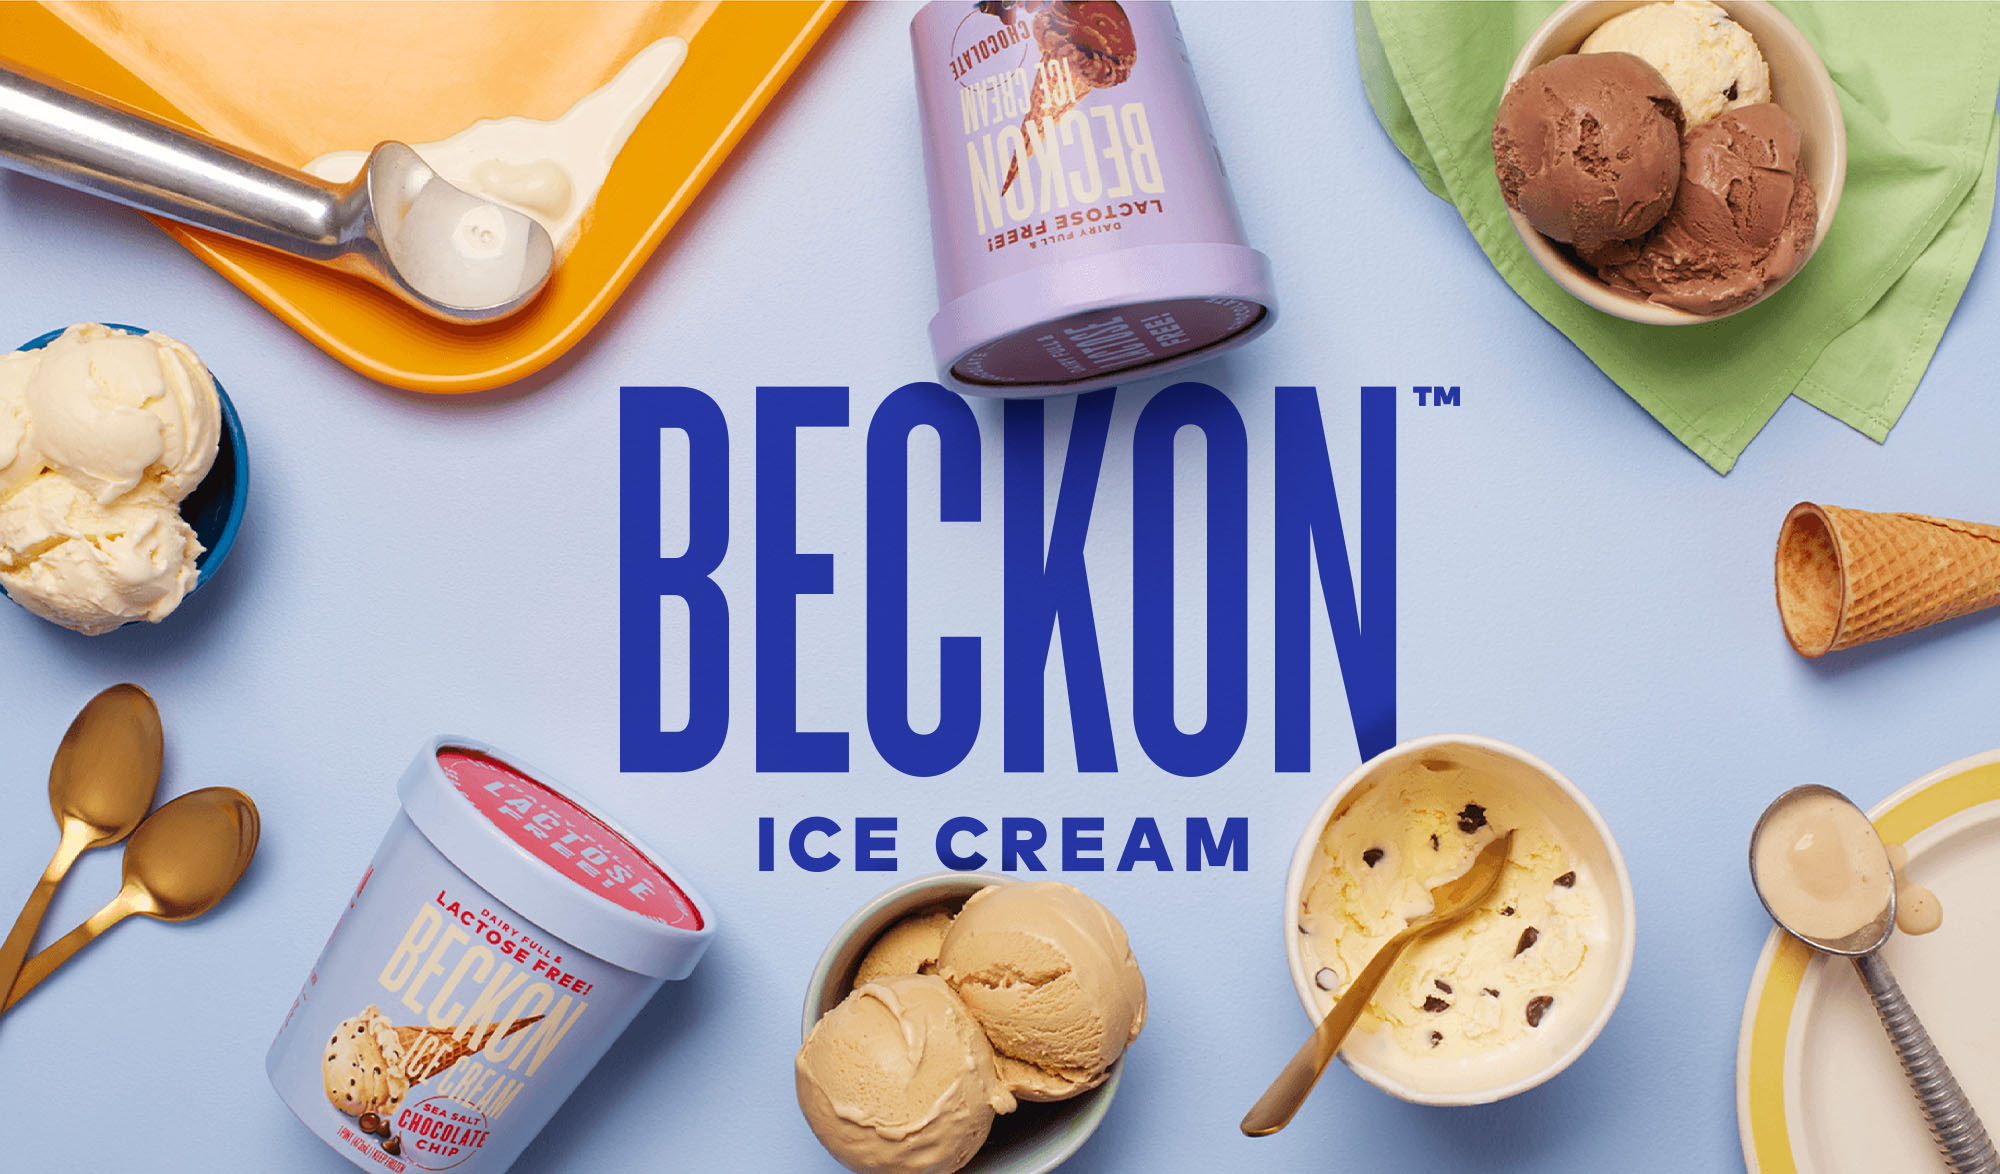 Beckon Ice Cream Redesign Proves Lactose-Free Can Be For All